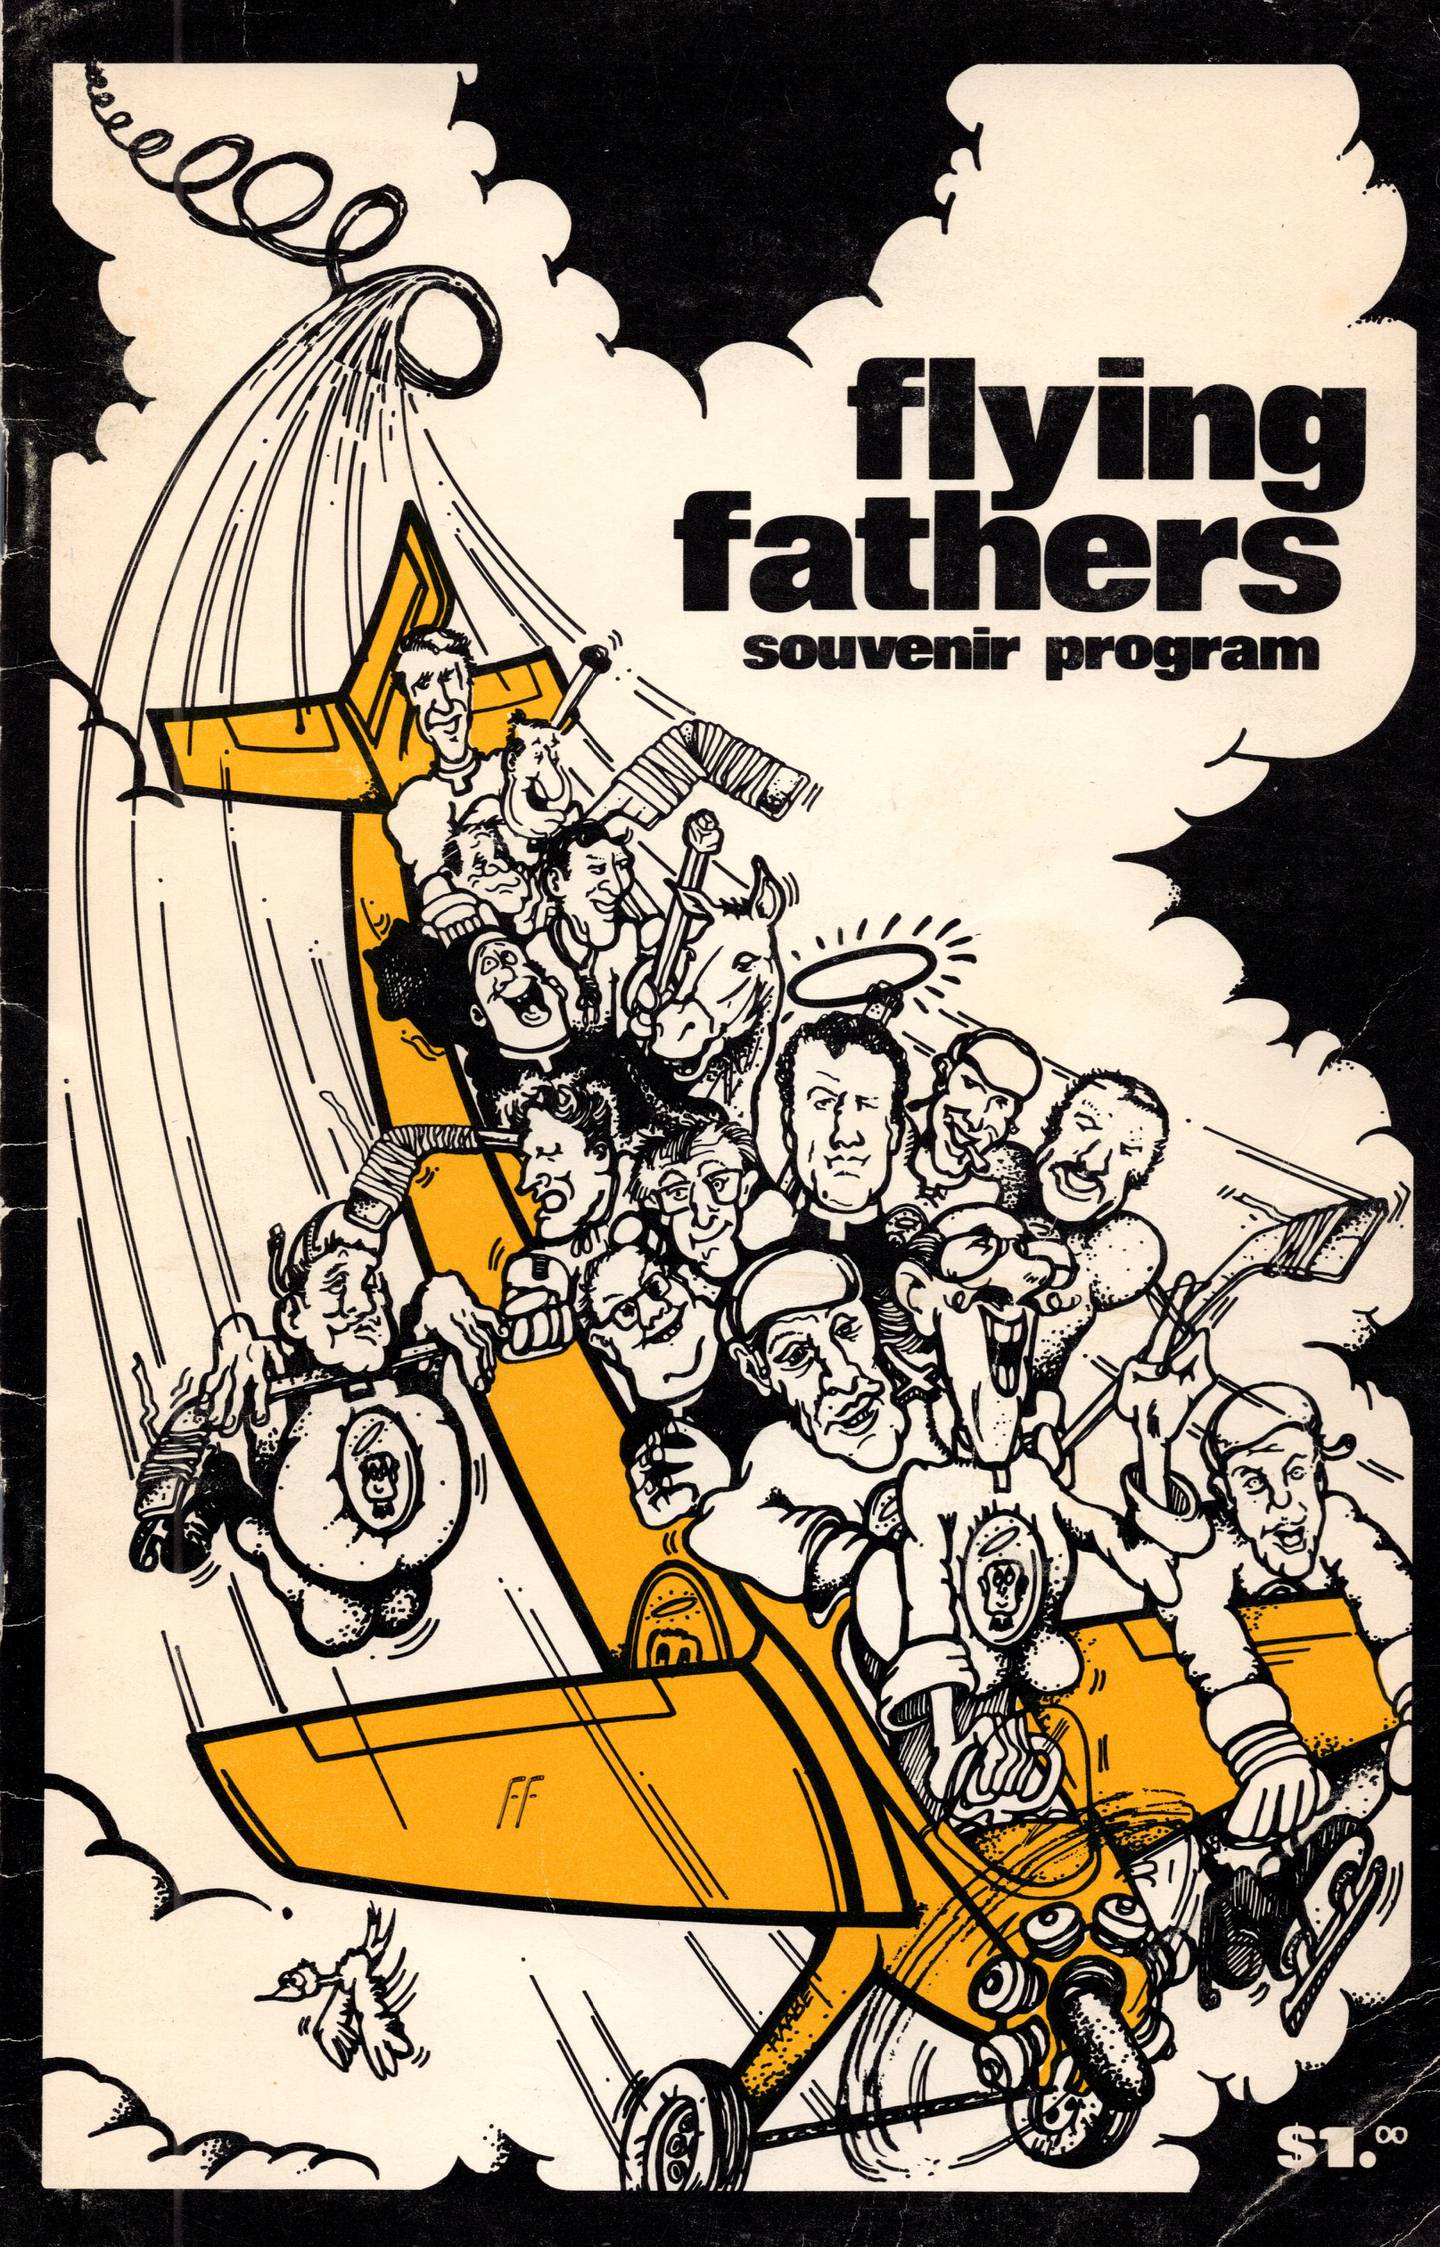 The cover of a souvenir program for the 1981 Flying Fathers hockey team